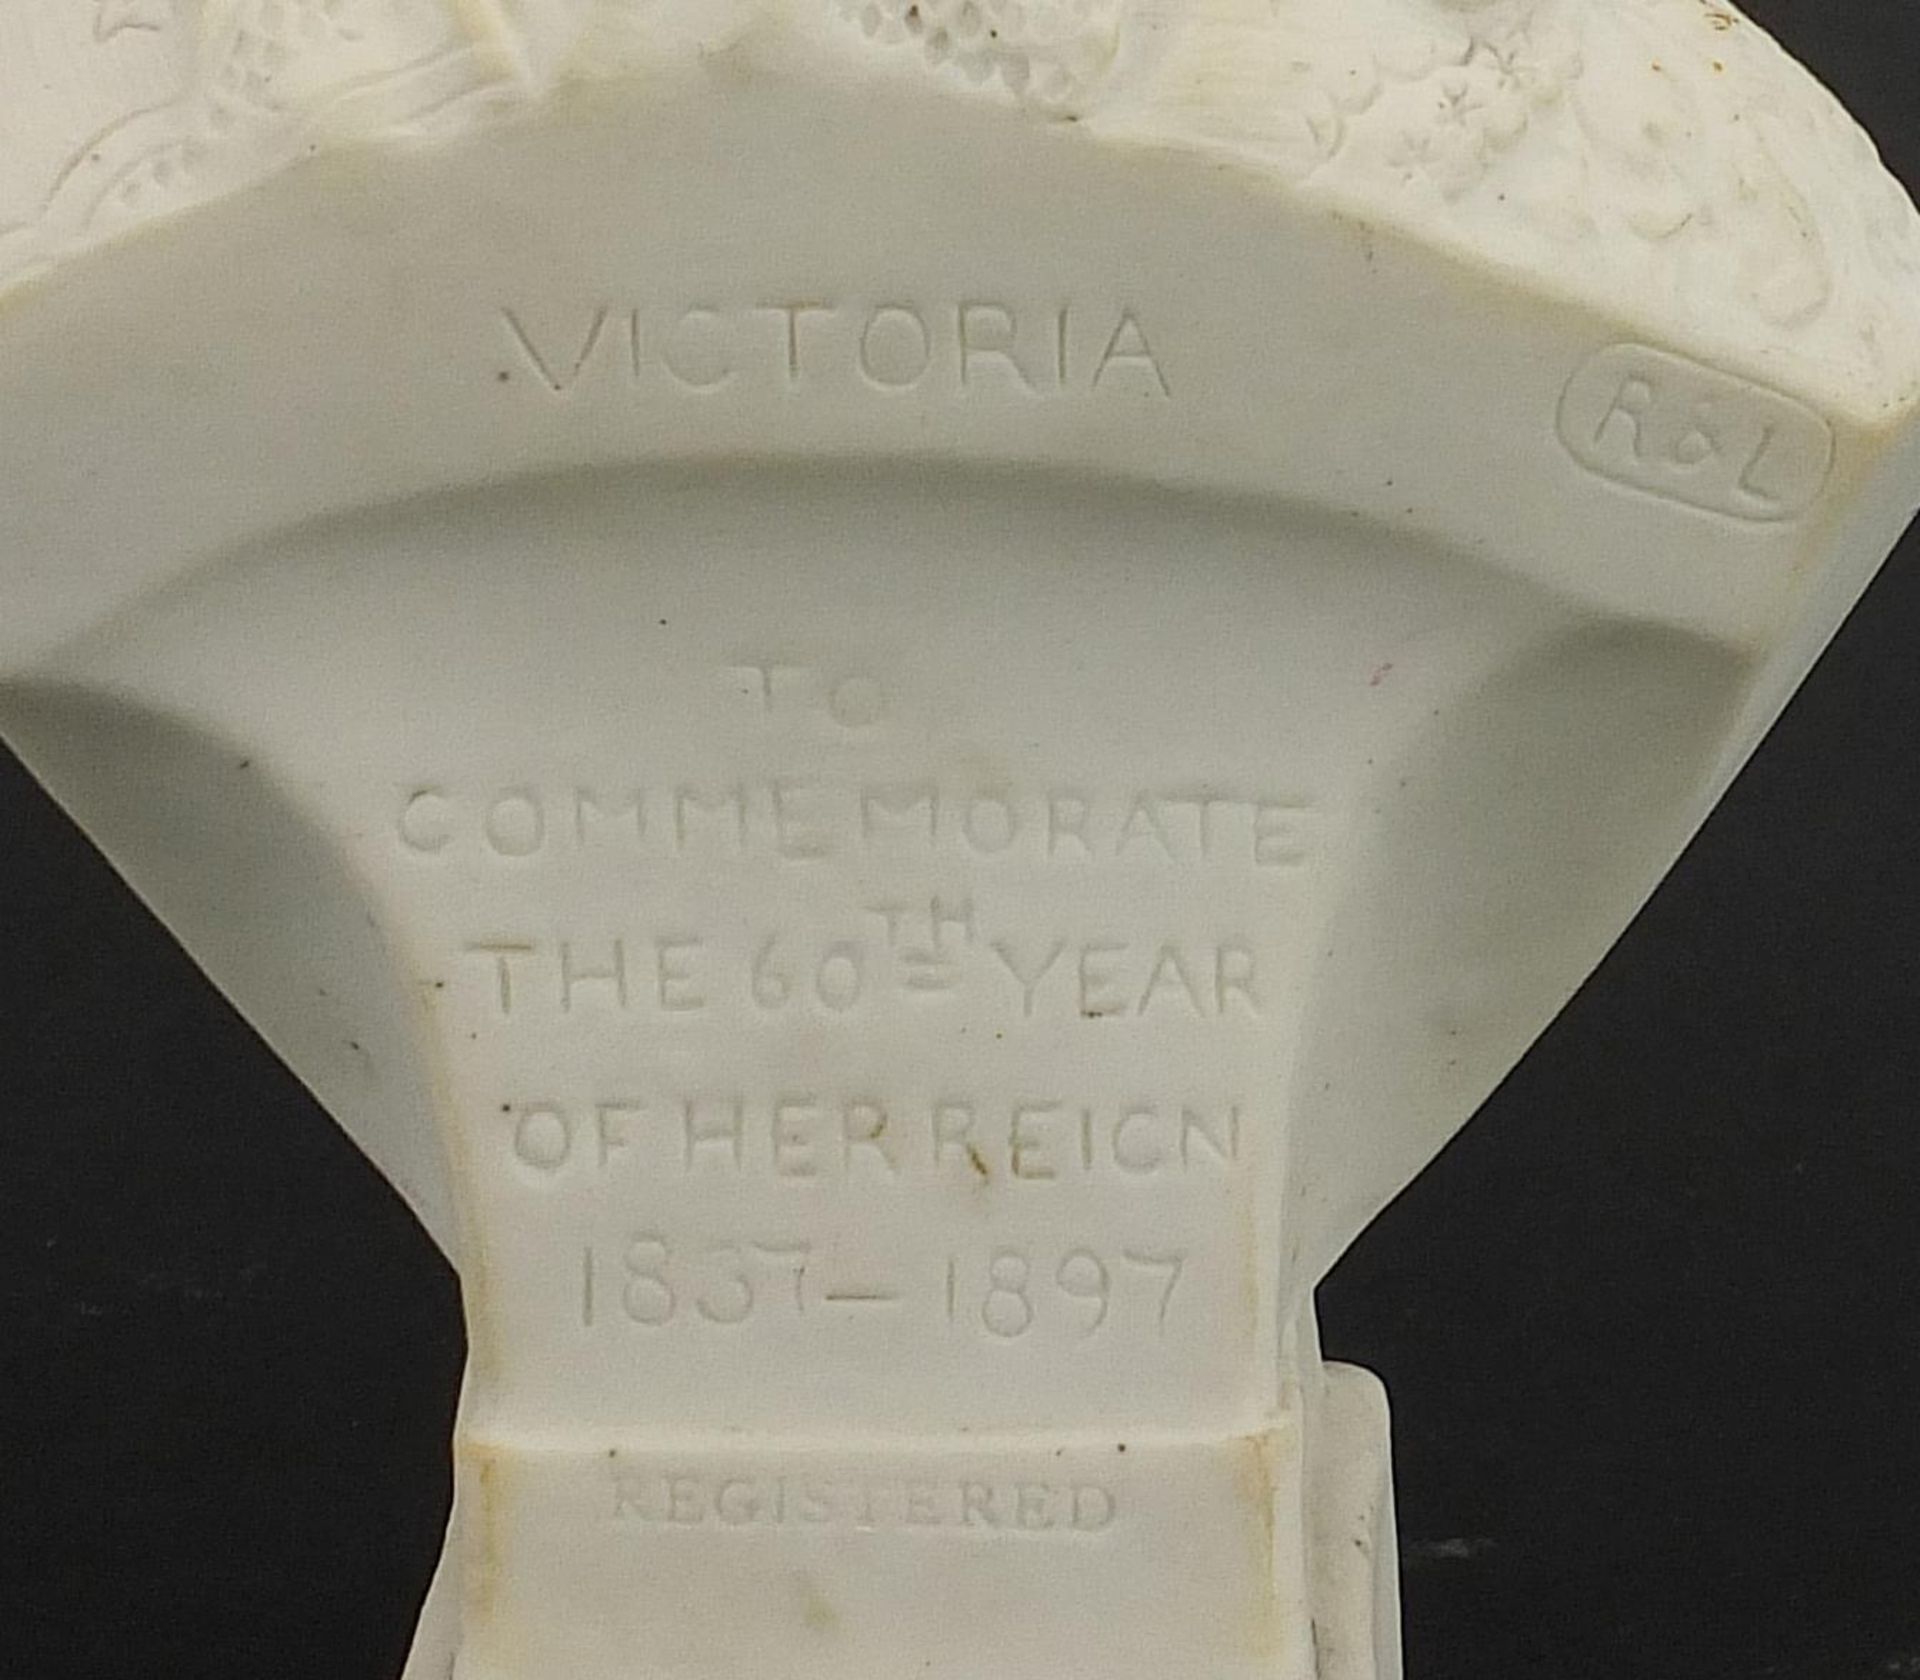 Robinson & Leadbeater parian ware bust of Queen Victoria commemorating the 60th year of her reign, - Image 3 of 4